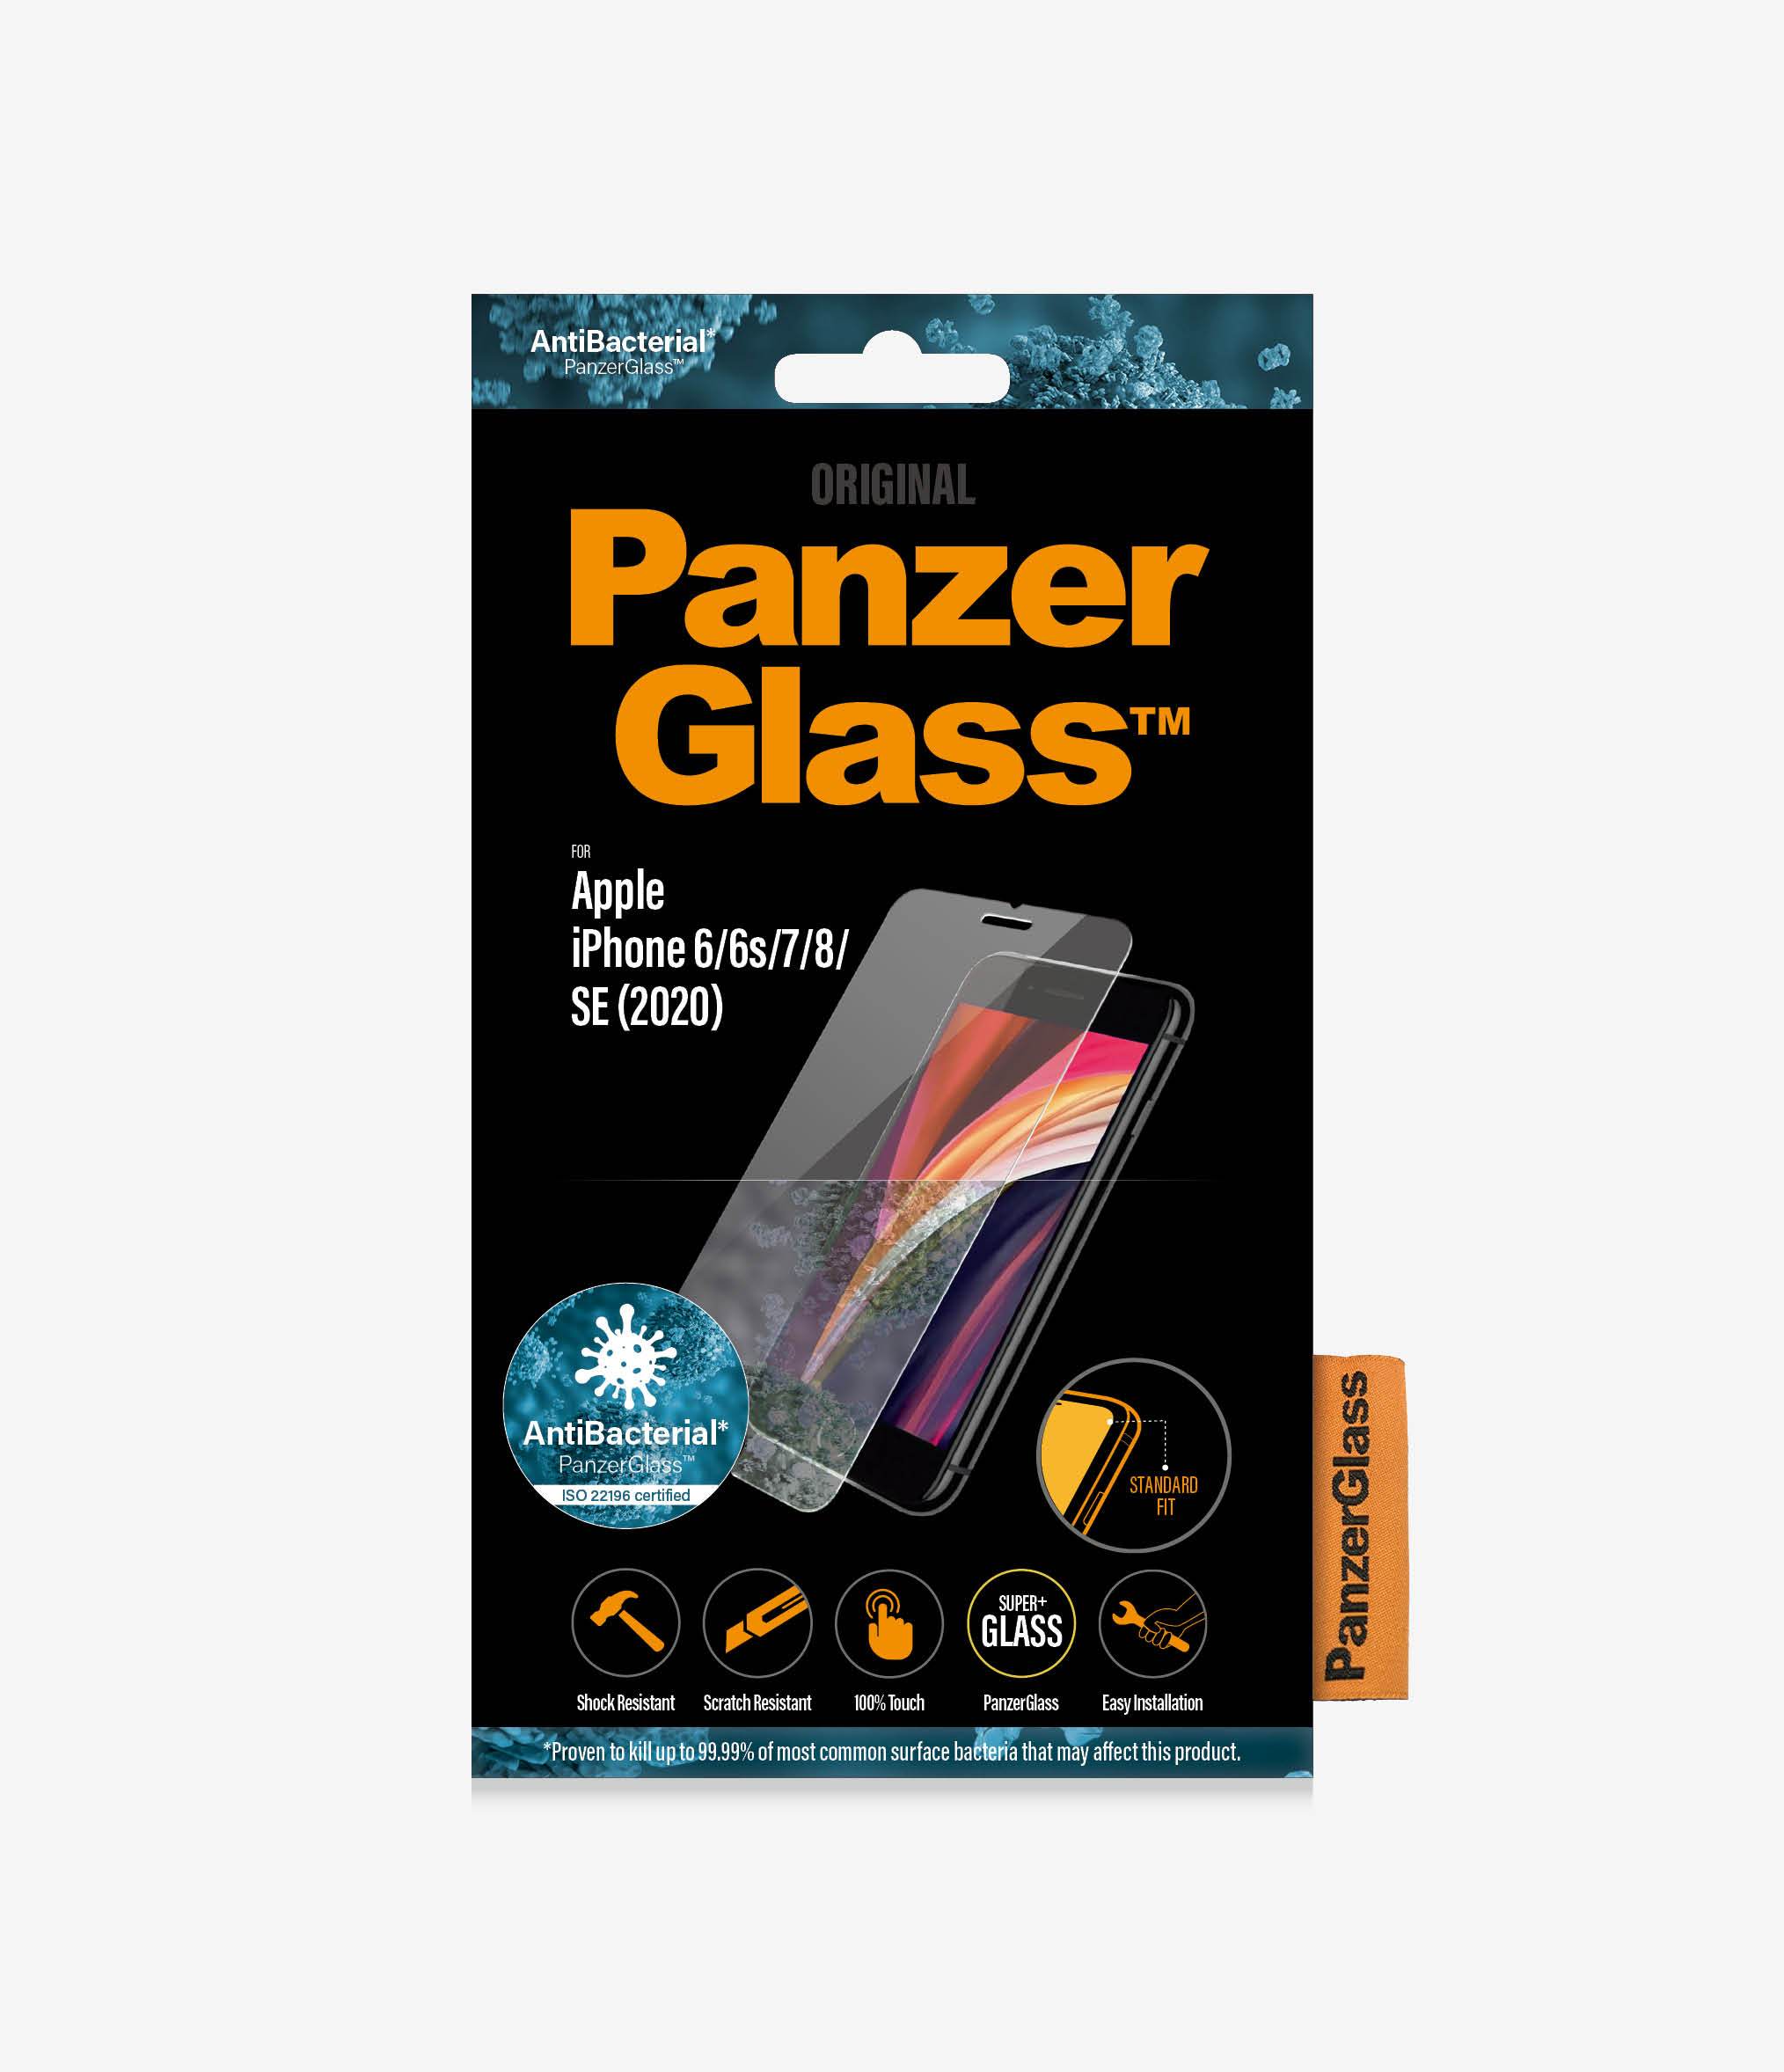 PanzerGlass™ Apple iPhone 6/6s/7/8/SE (2020) - AntiBacterial (2684) - Screen Protector -  Full frame coverage, Rounded edges, 100% touch preservation